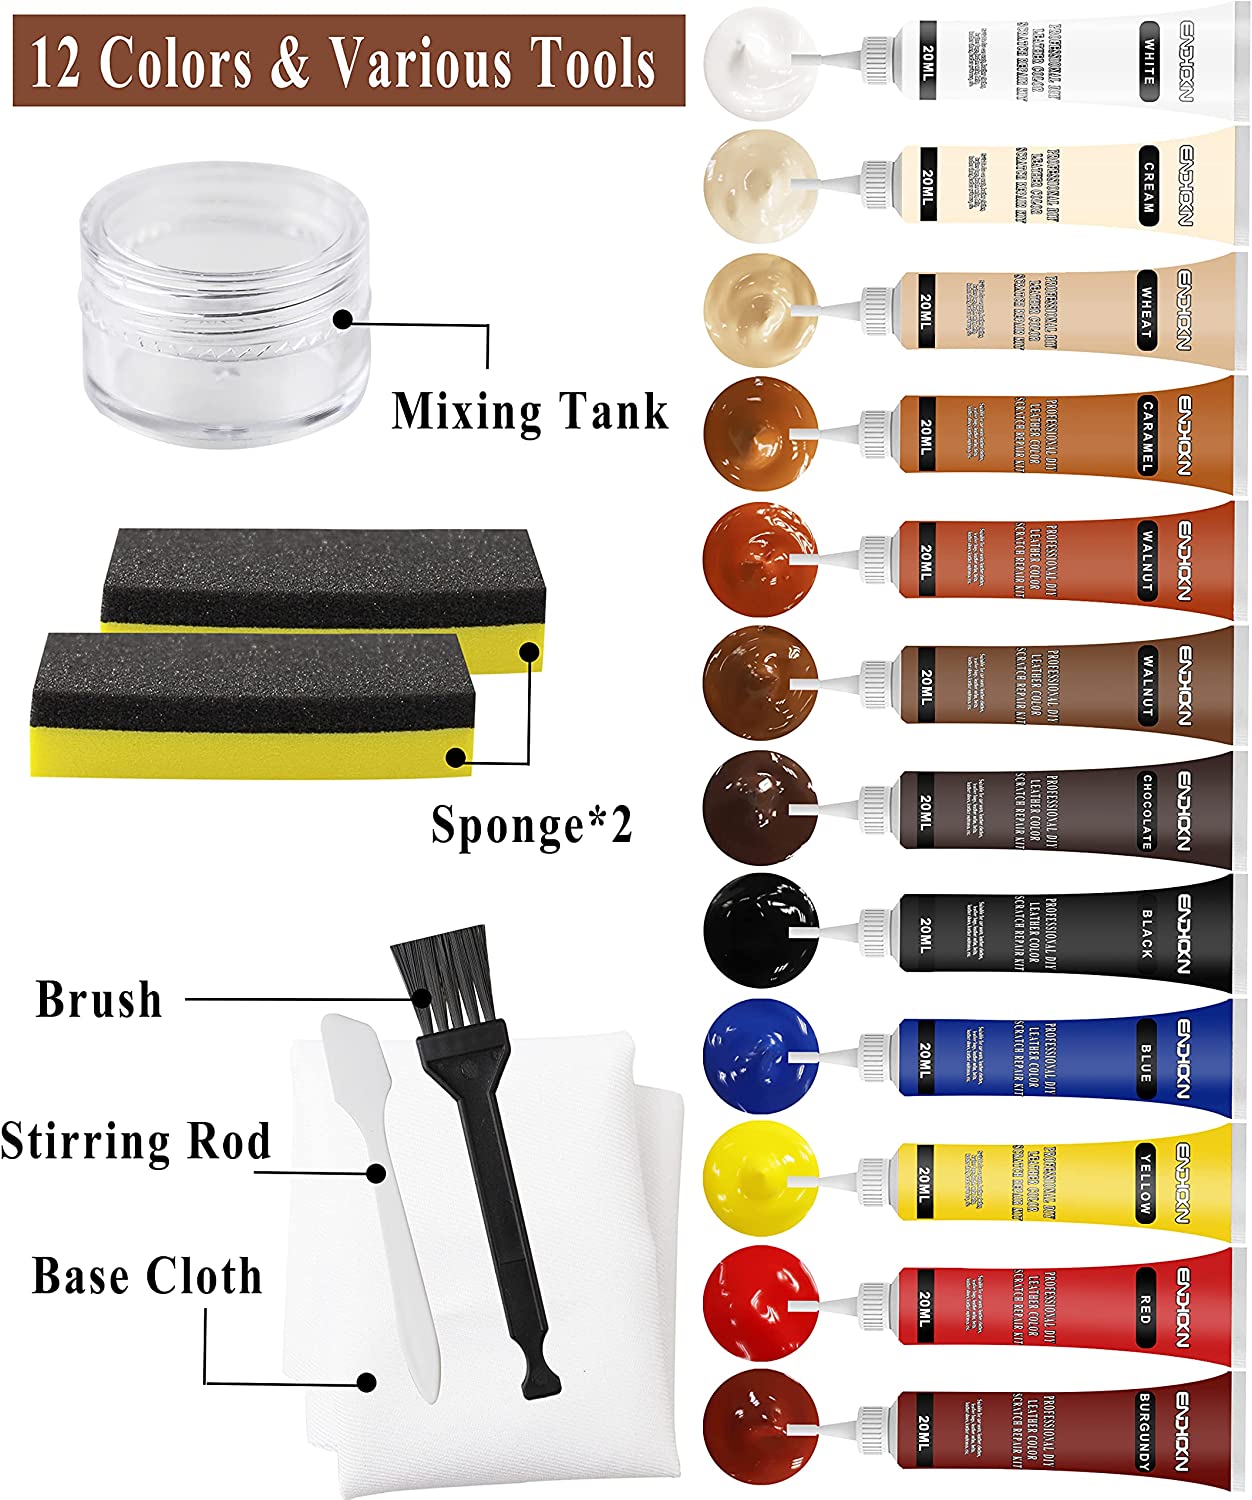 Endhokn Leather, Vinyl Recoloring Repair Kit - Car Seats, Sofas and Leather  Products Crack, Fade, Wear Color Repair Paste 200ml (12 Colors)